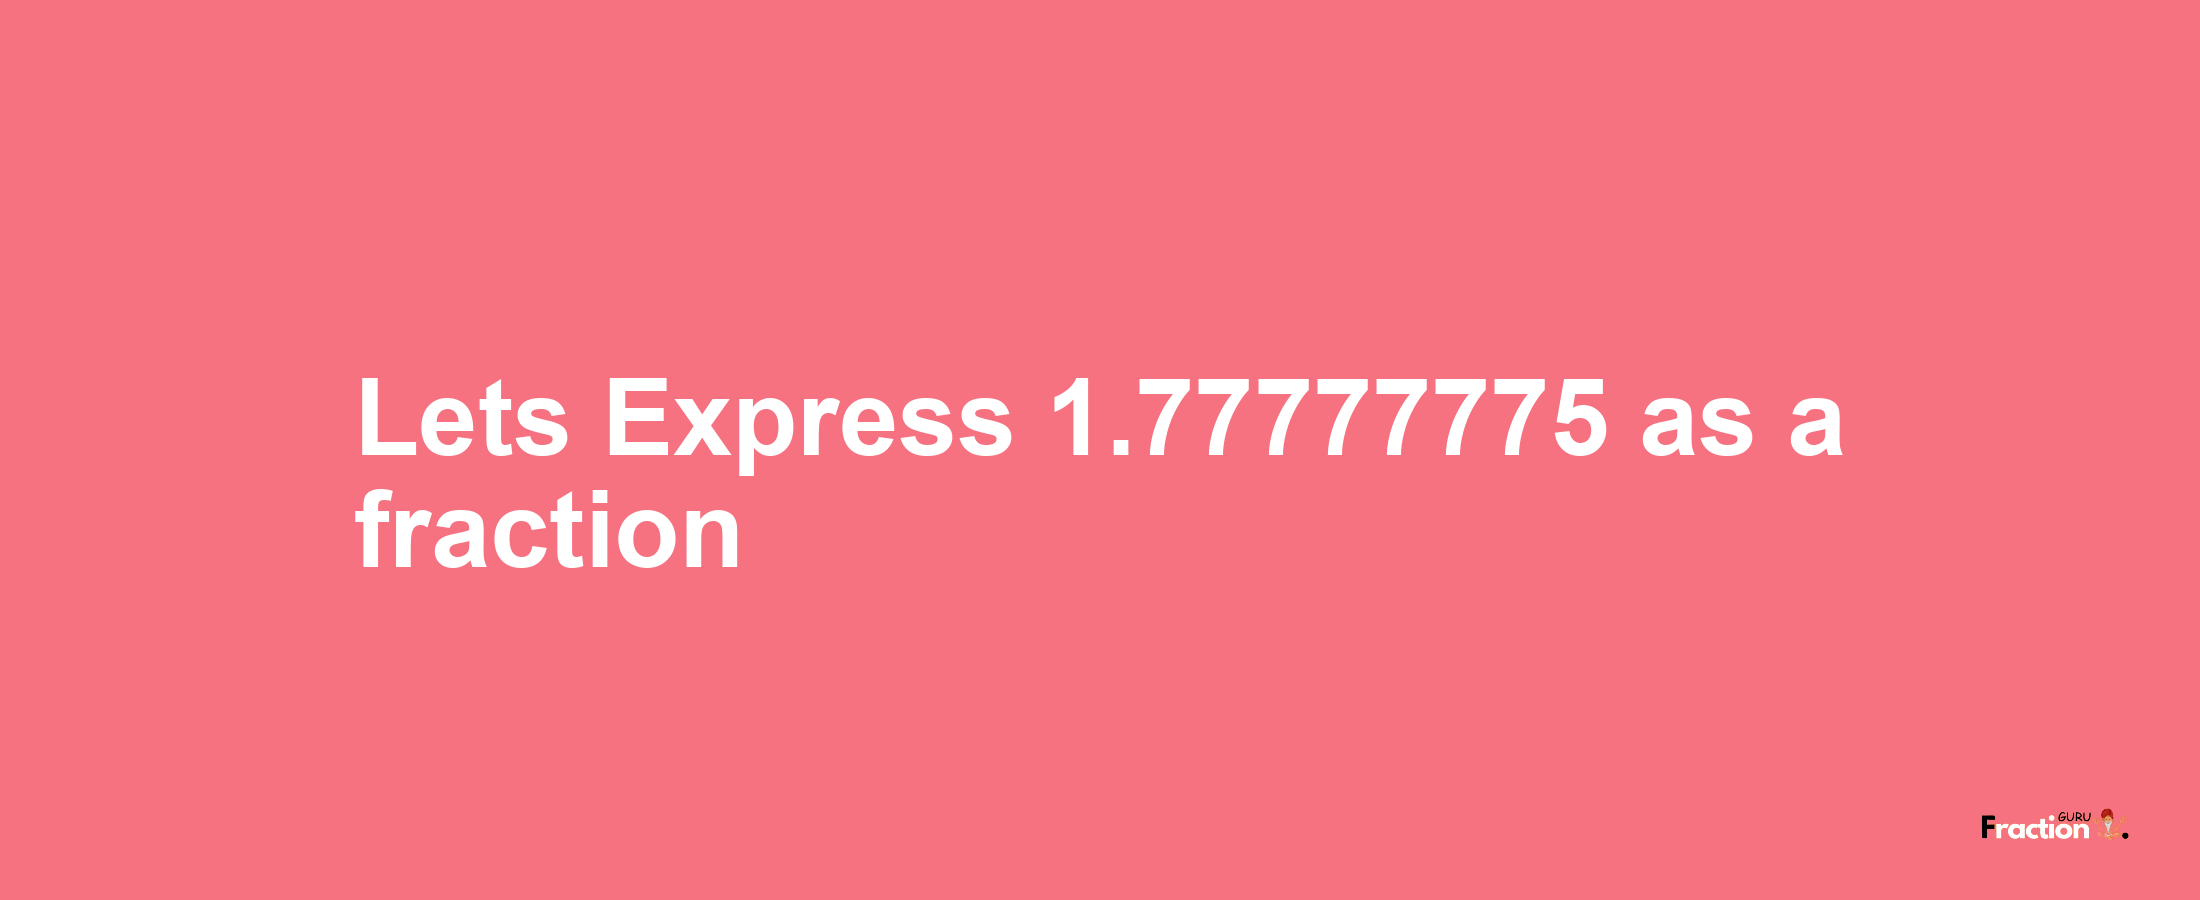 Lets Express 1.77777775 as afraction